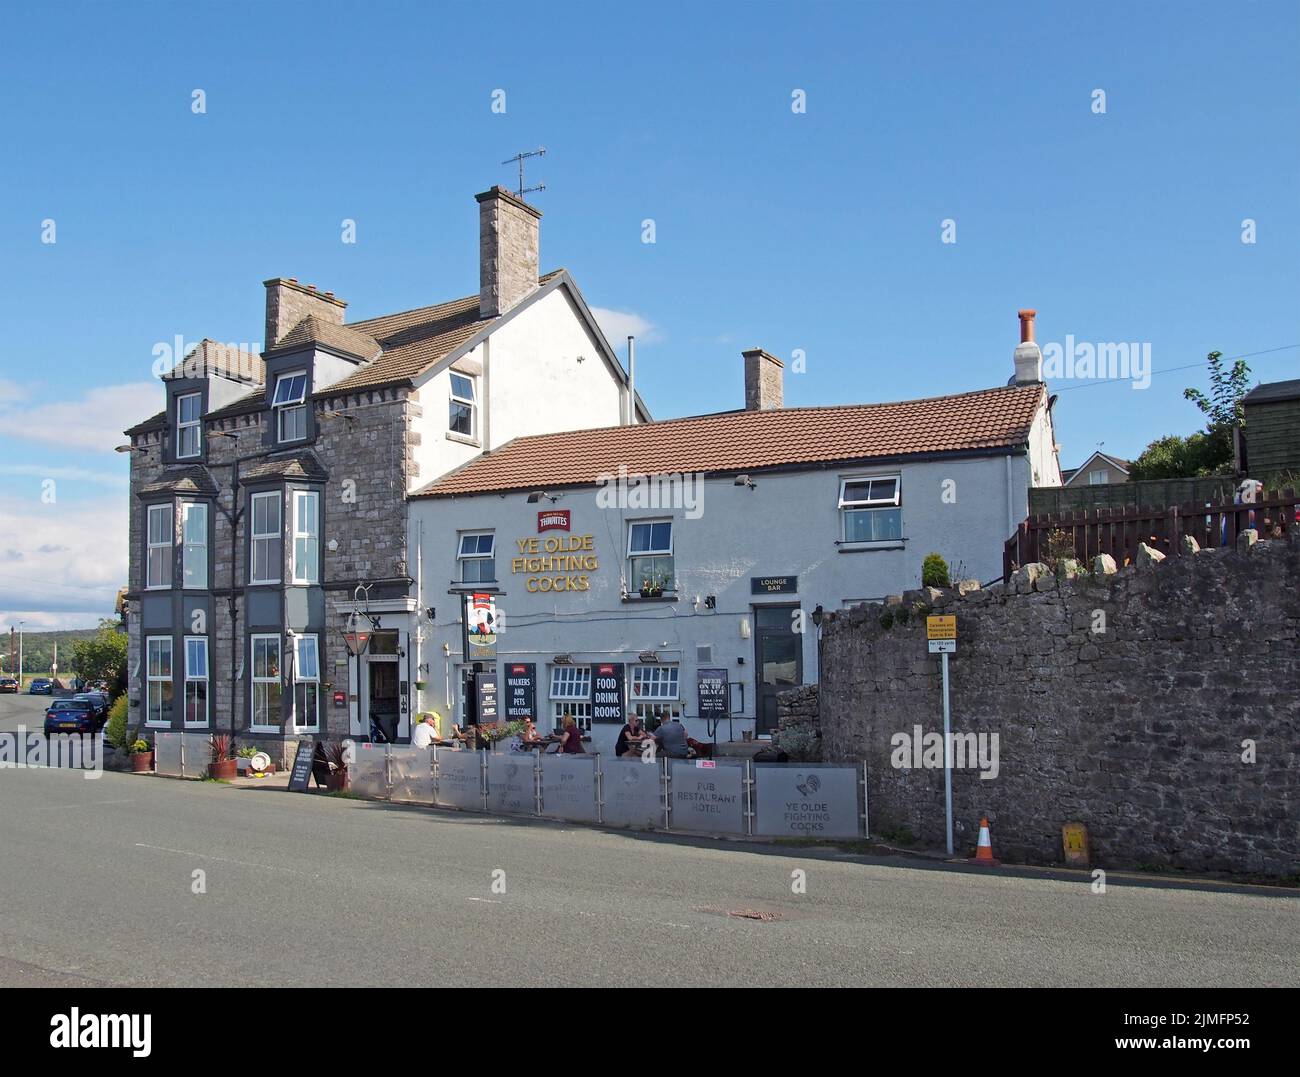 View of the ye olde fighting cocks pub in arnside in cumbria with people drinking outside in summer Stock Photo